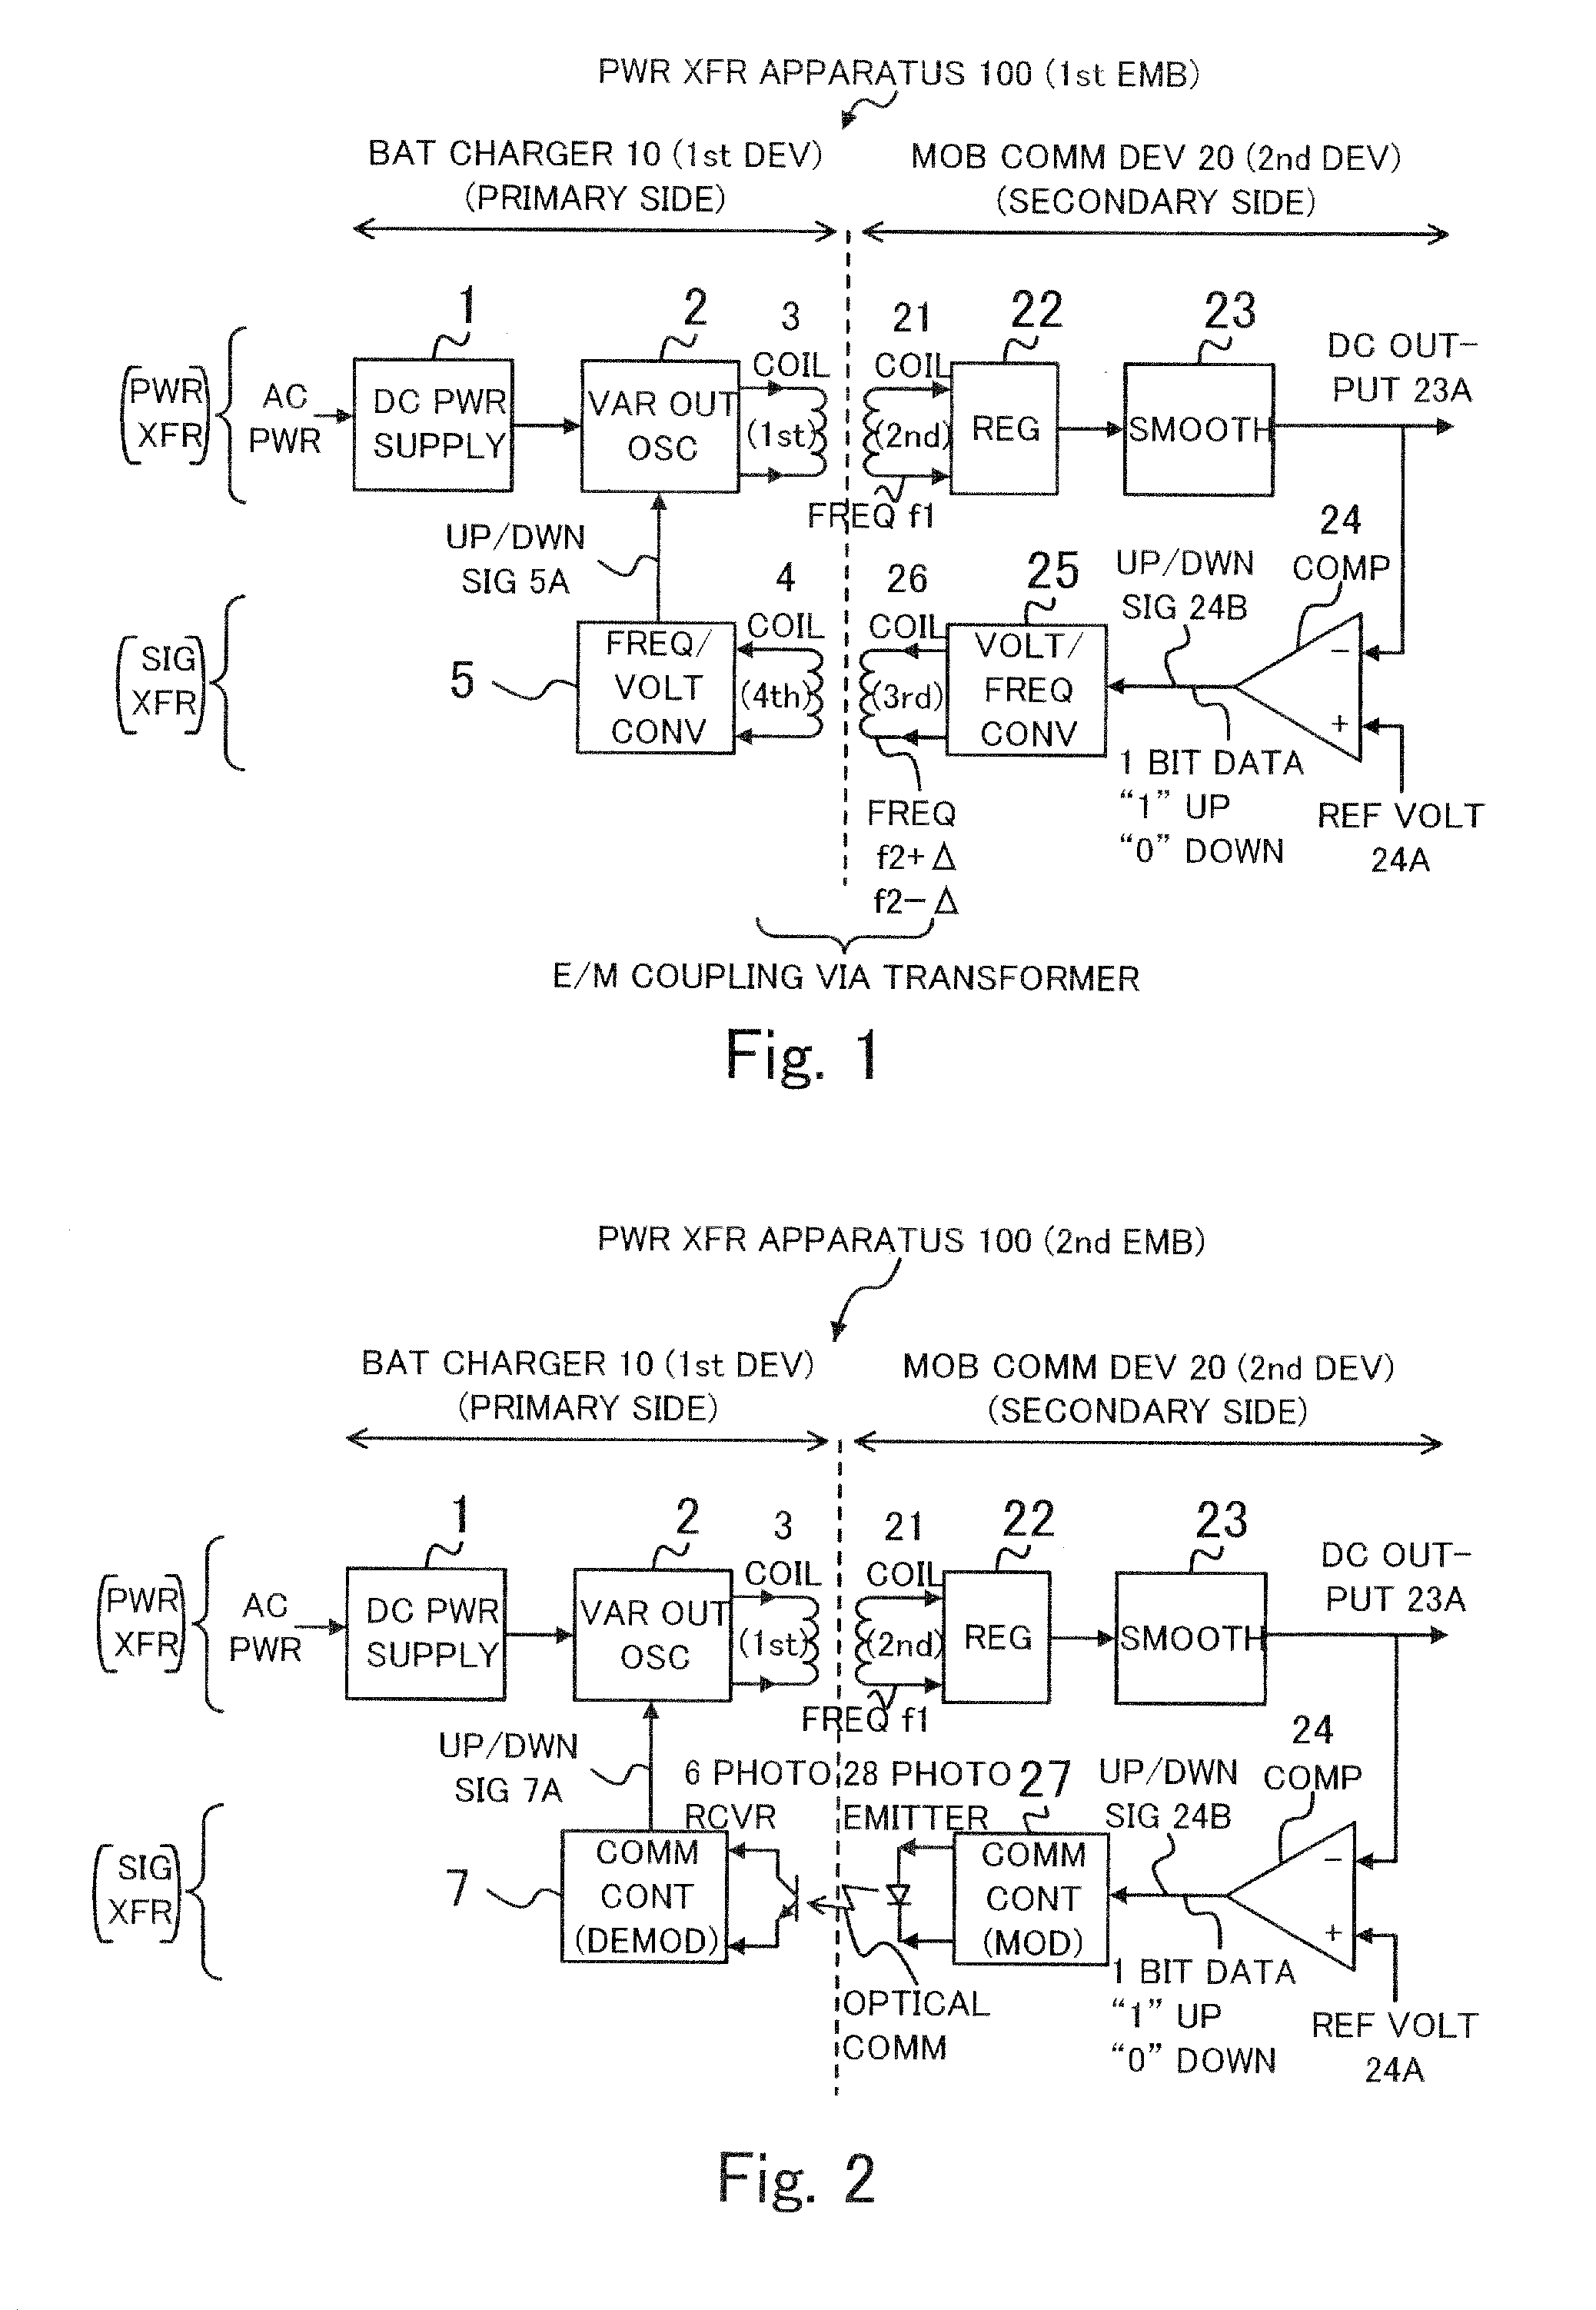 Power transfer apparatus and method for transferring electric power